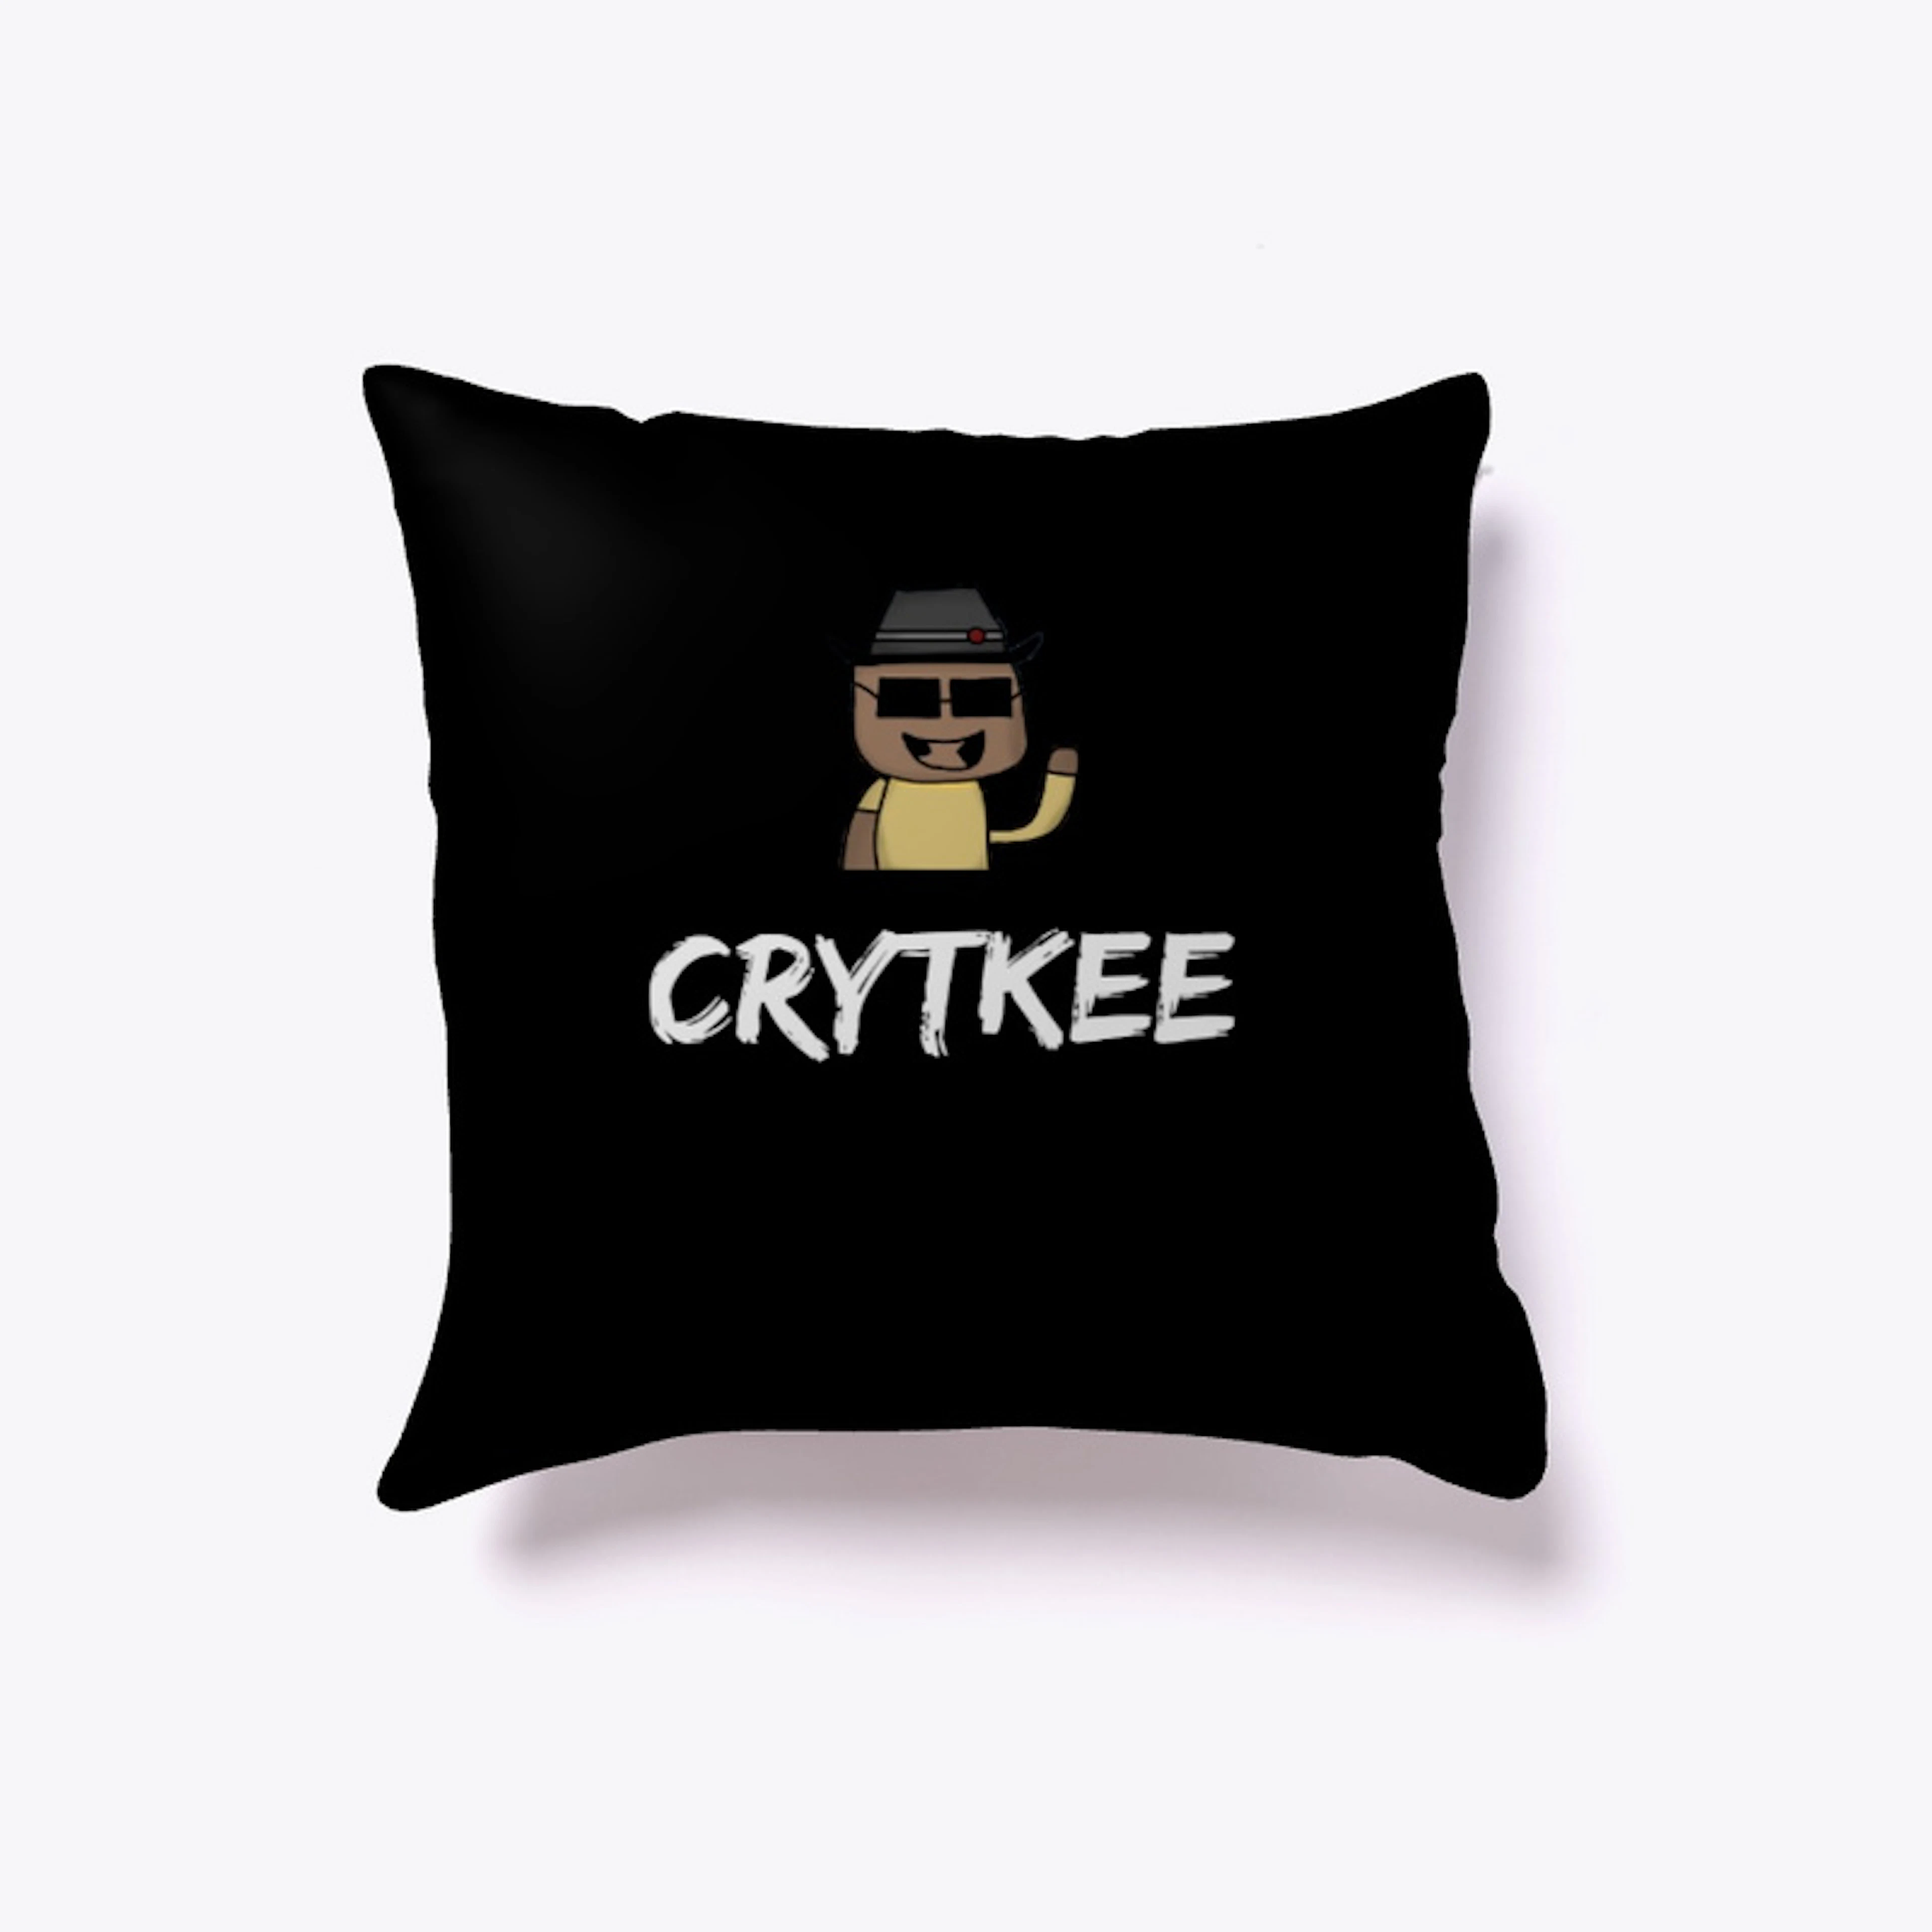 Crytkee's Warm Pillow